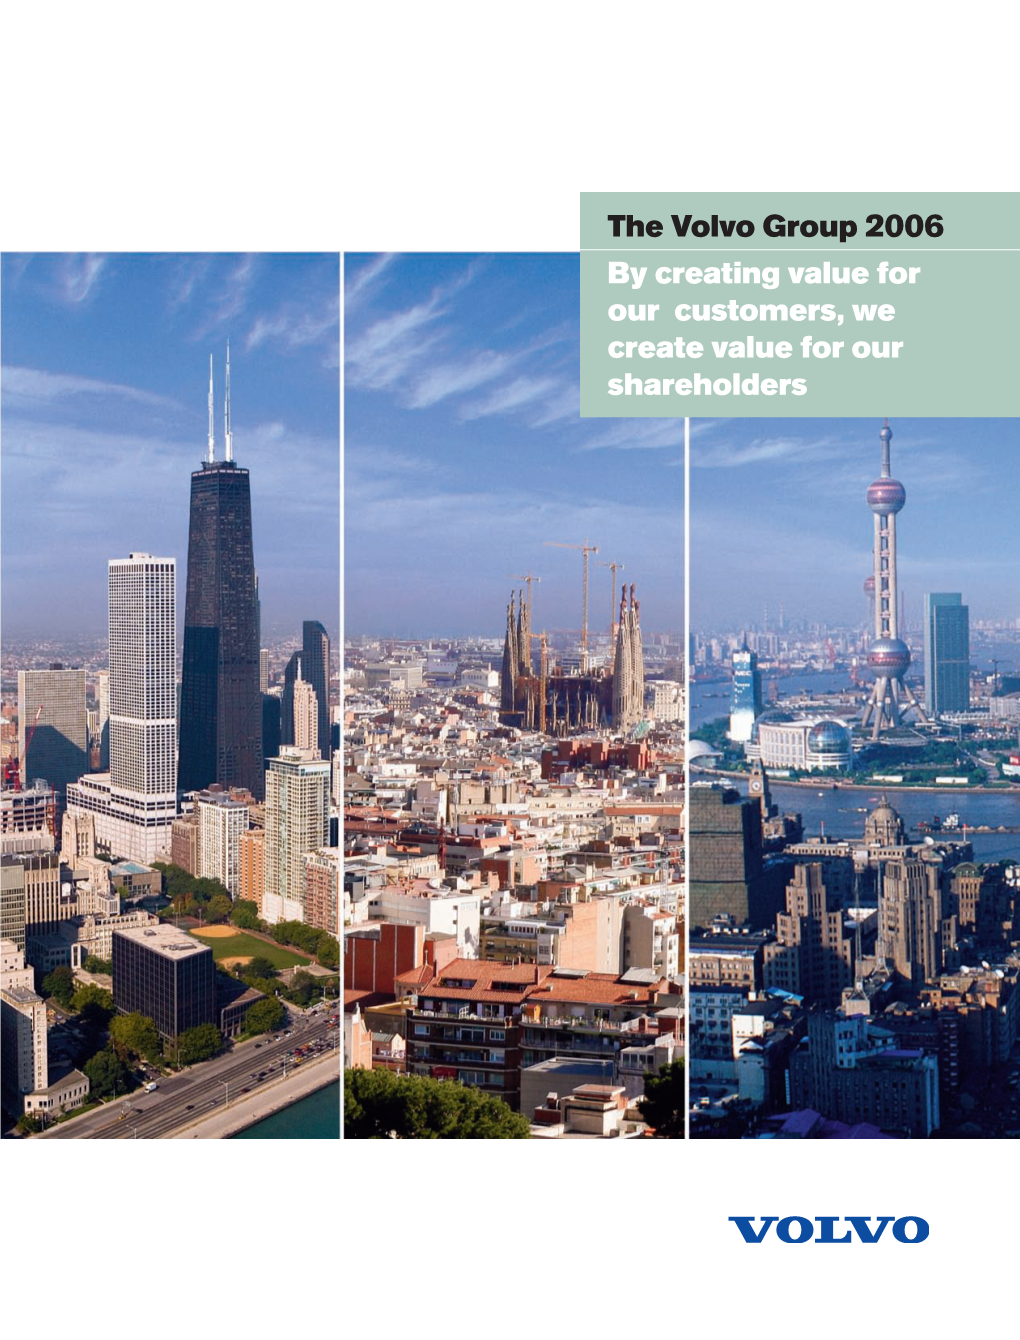 The Volvo Group 2006 by Creating Value for Our Customers